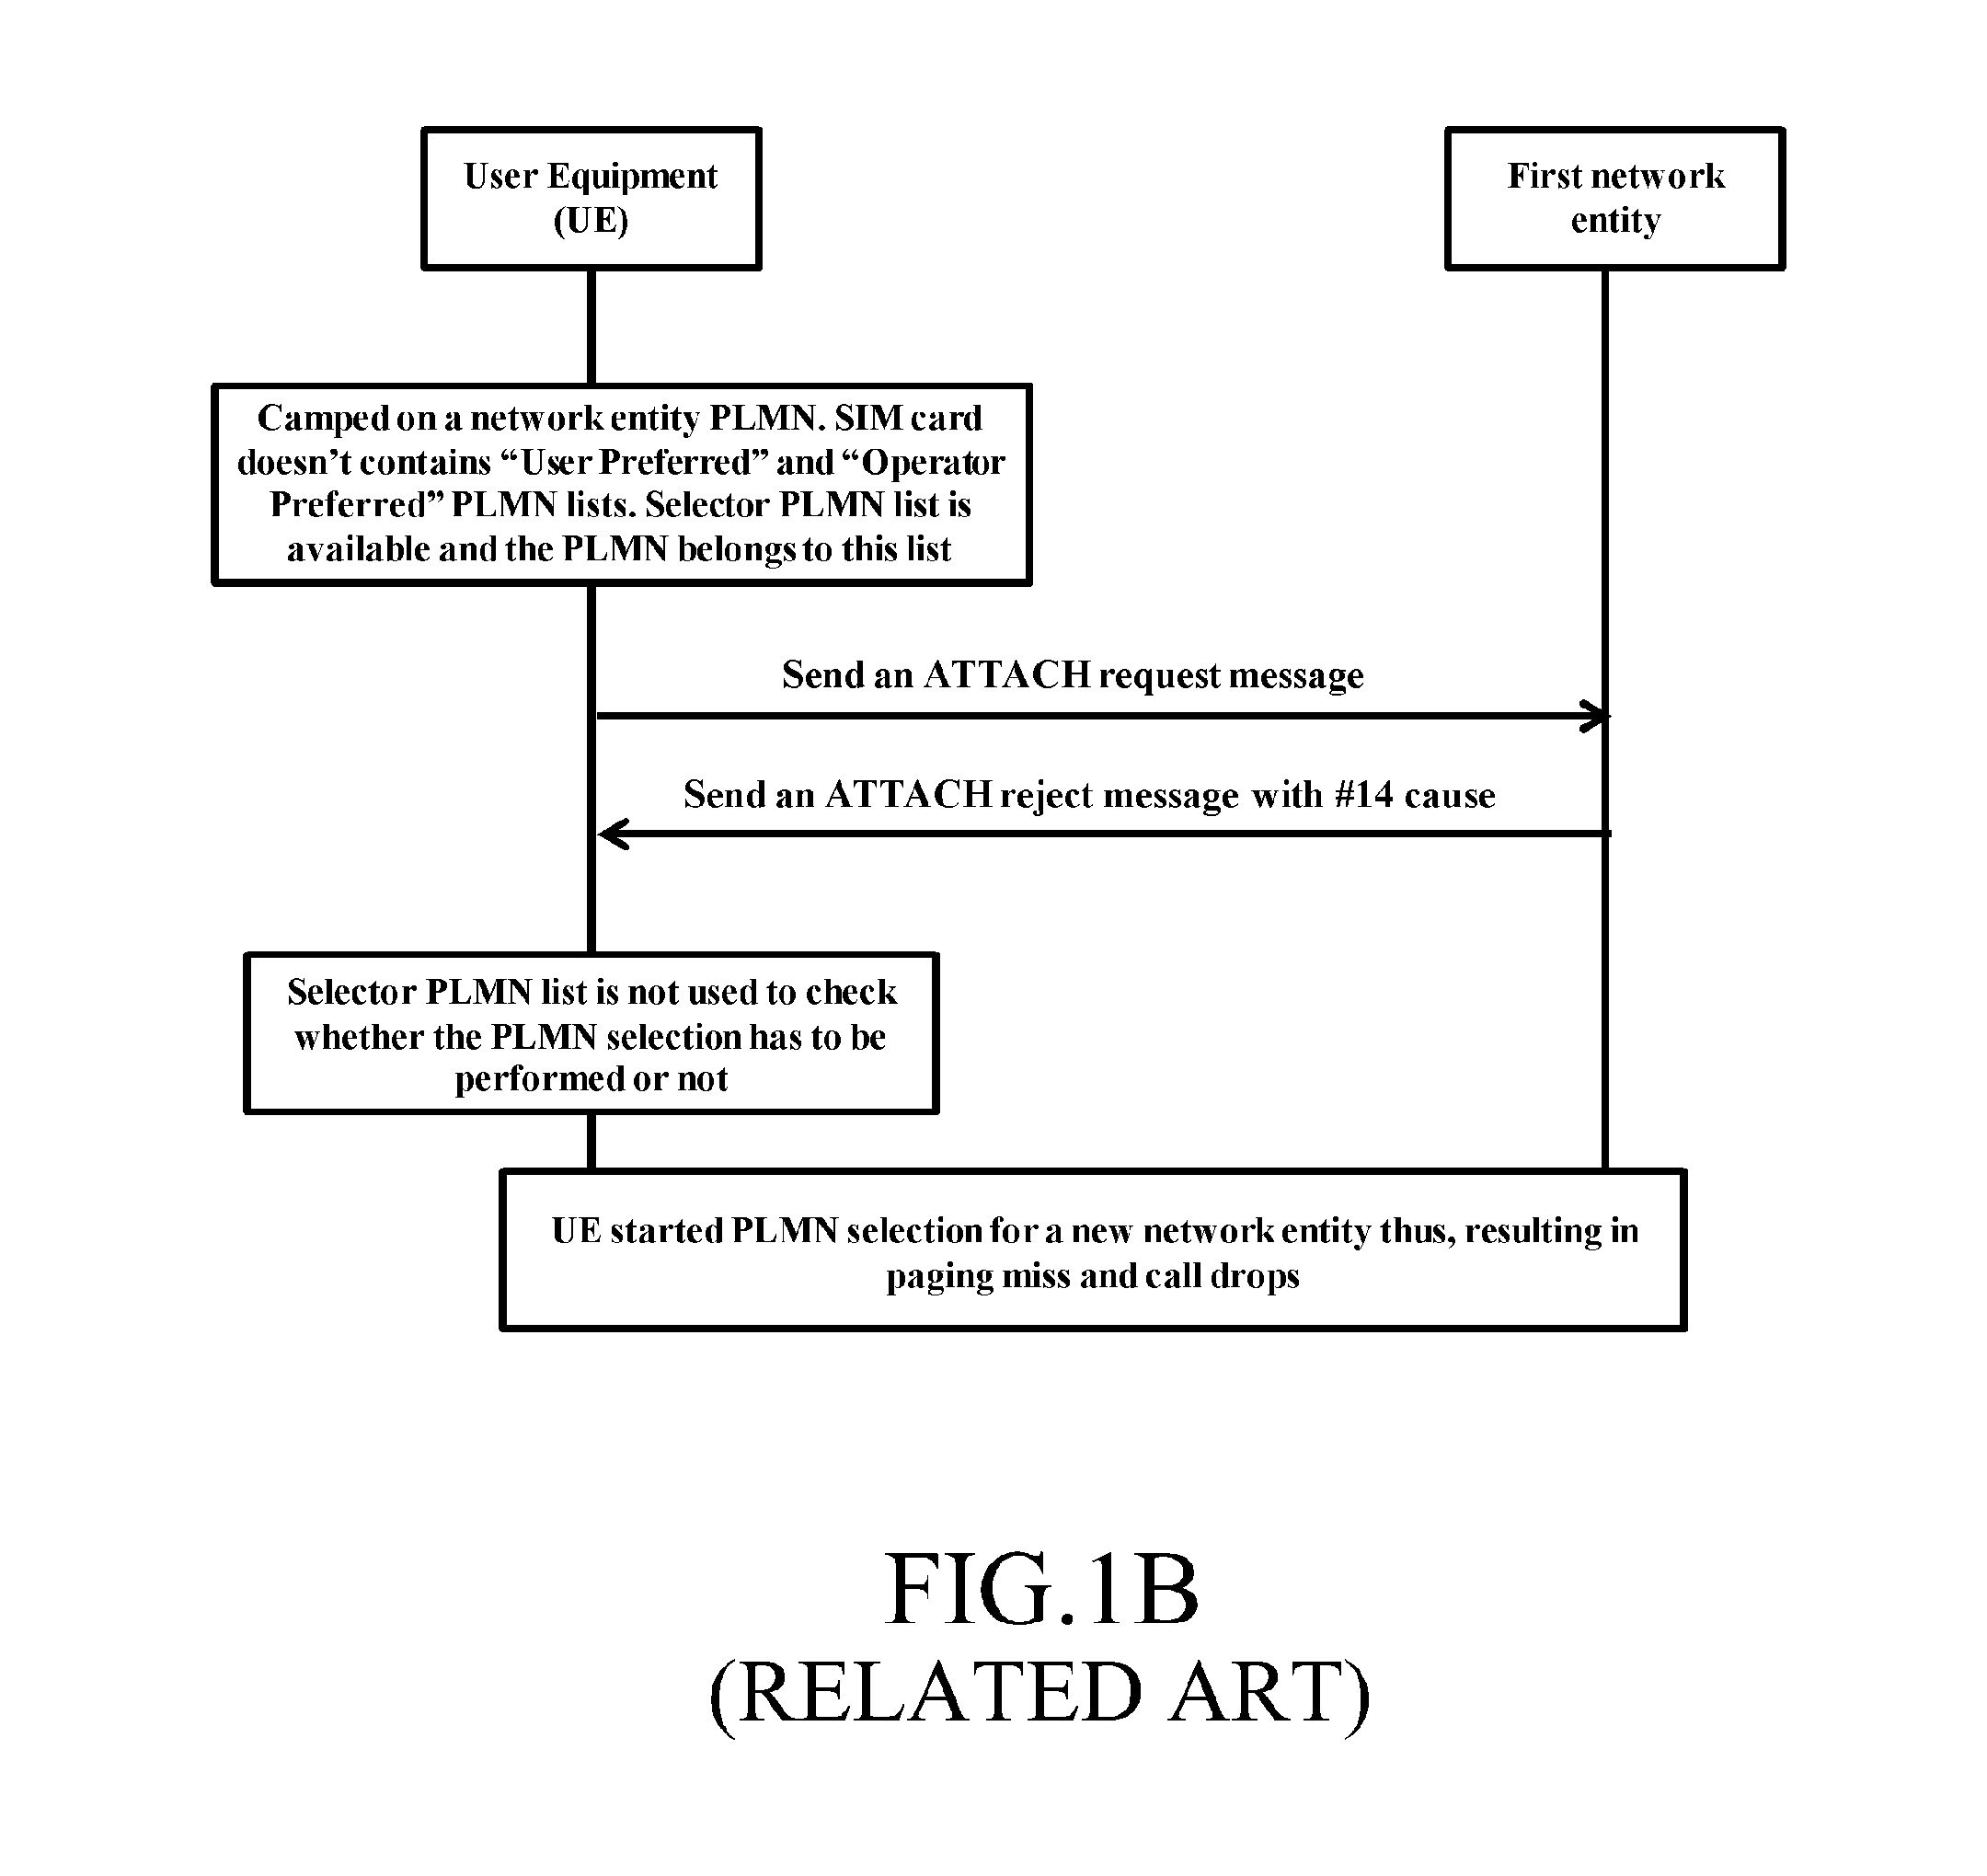 Method for handling attach reject message with #14 cause at user equipment